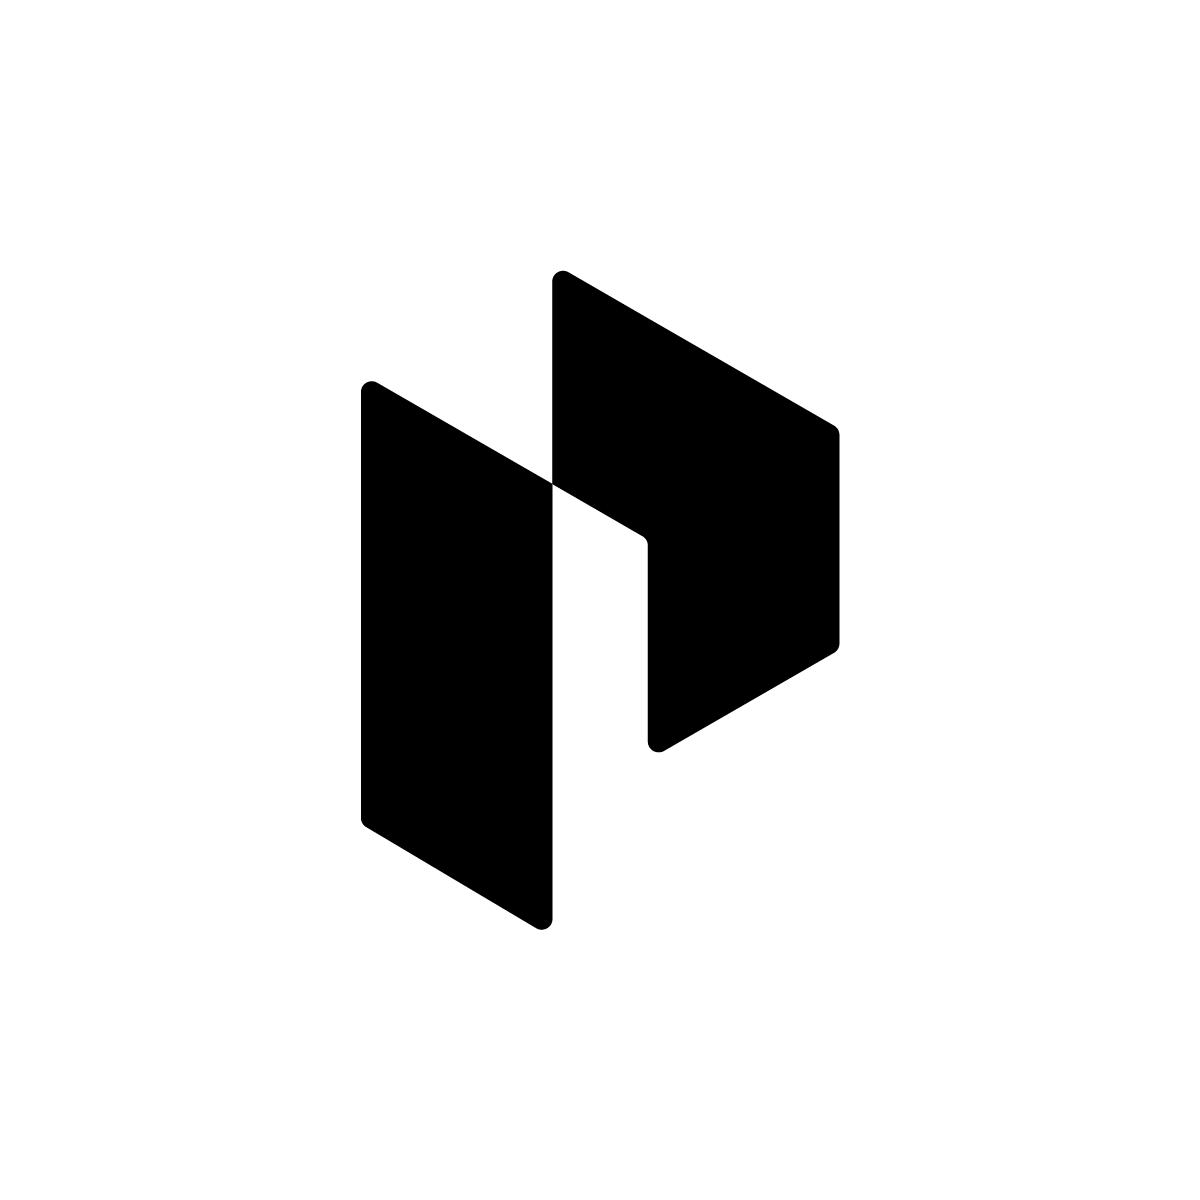 Abstract P Logo ingeniously uses hexagon shapes to shape the letter 'P,' reflecting elegance, modernity, and precision.